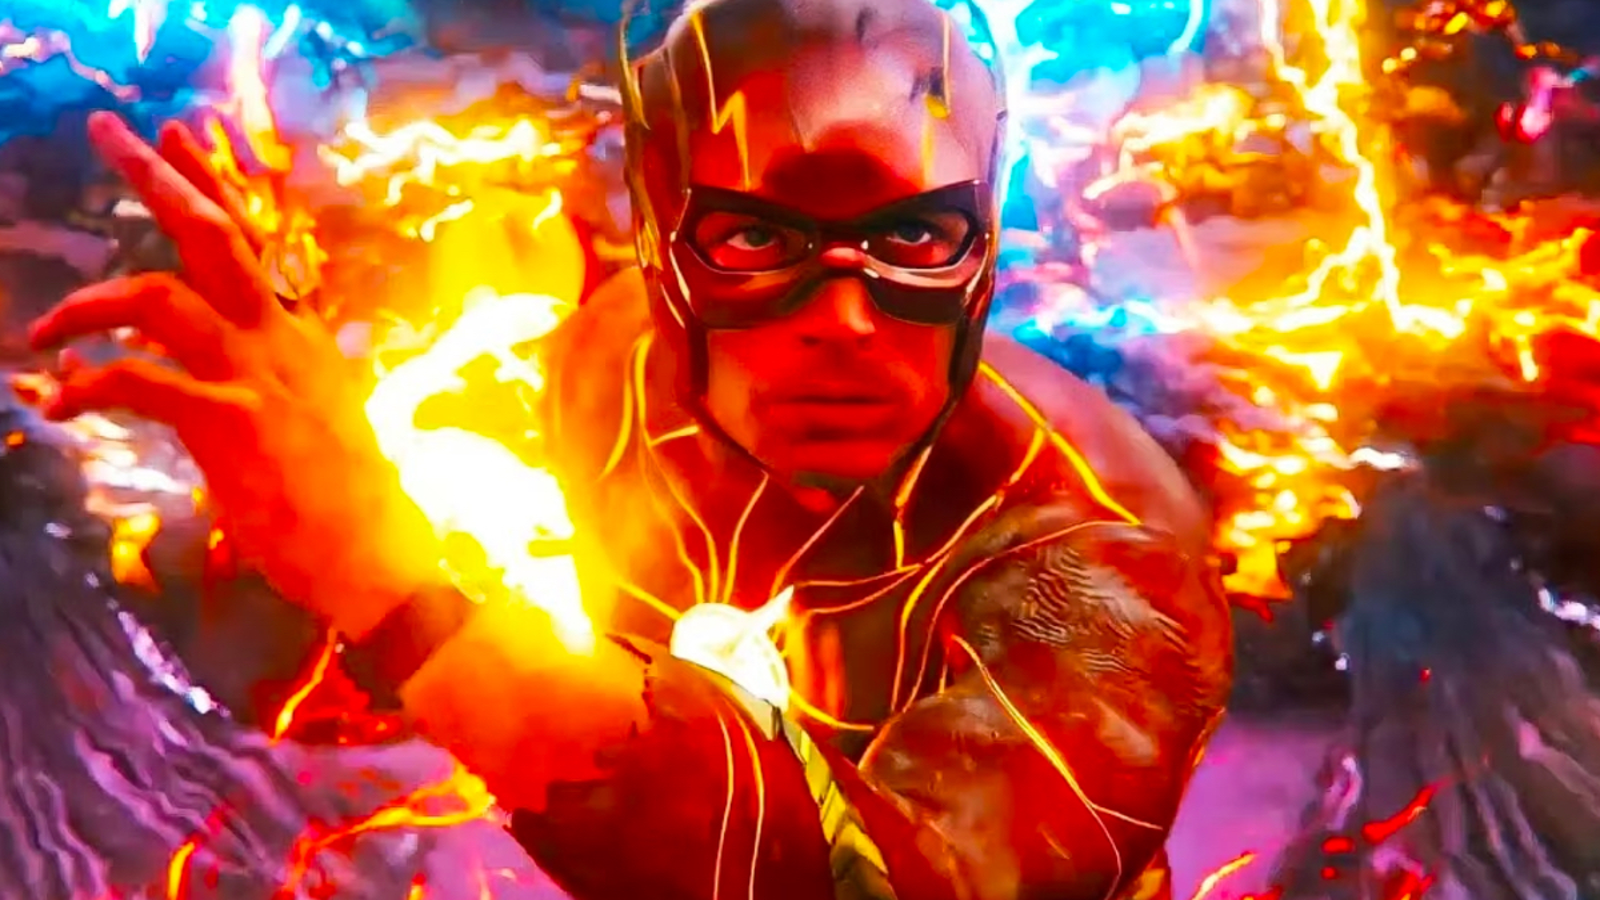 The Flash Movie Ending Explained: What George Clooney Cameo Means for DCEU